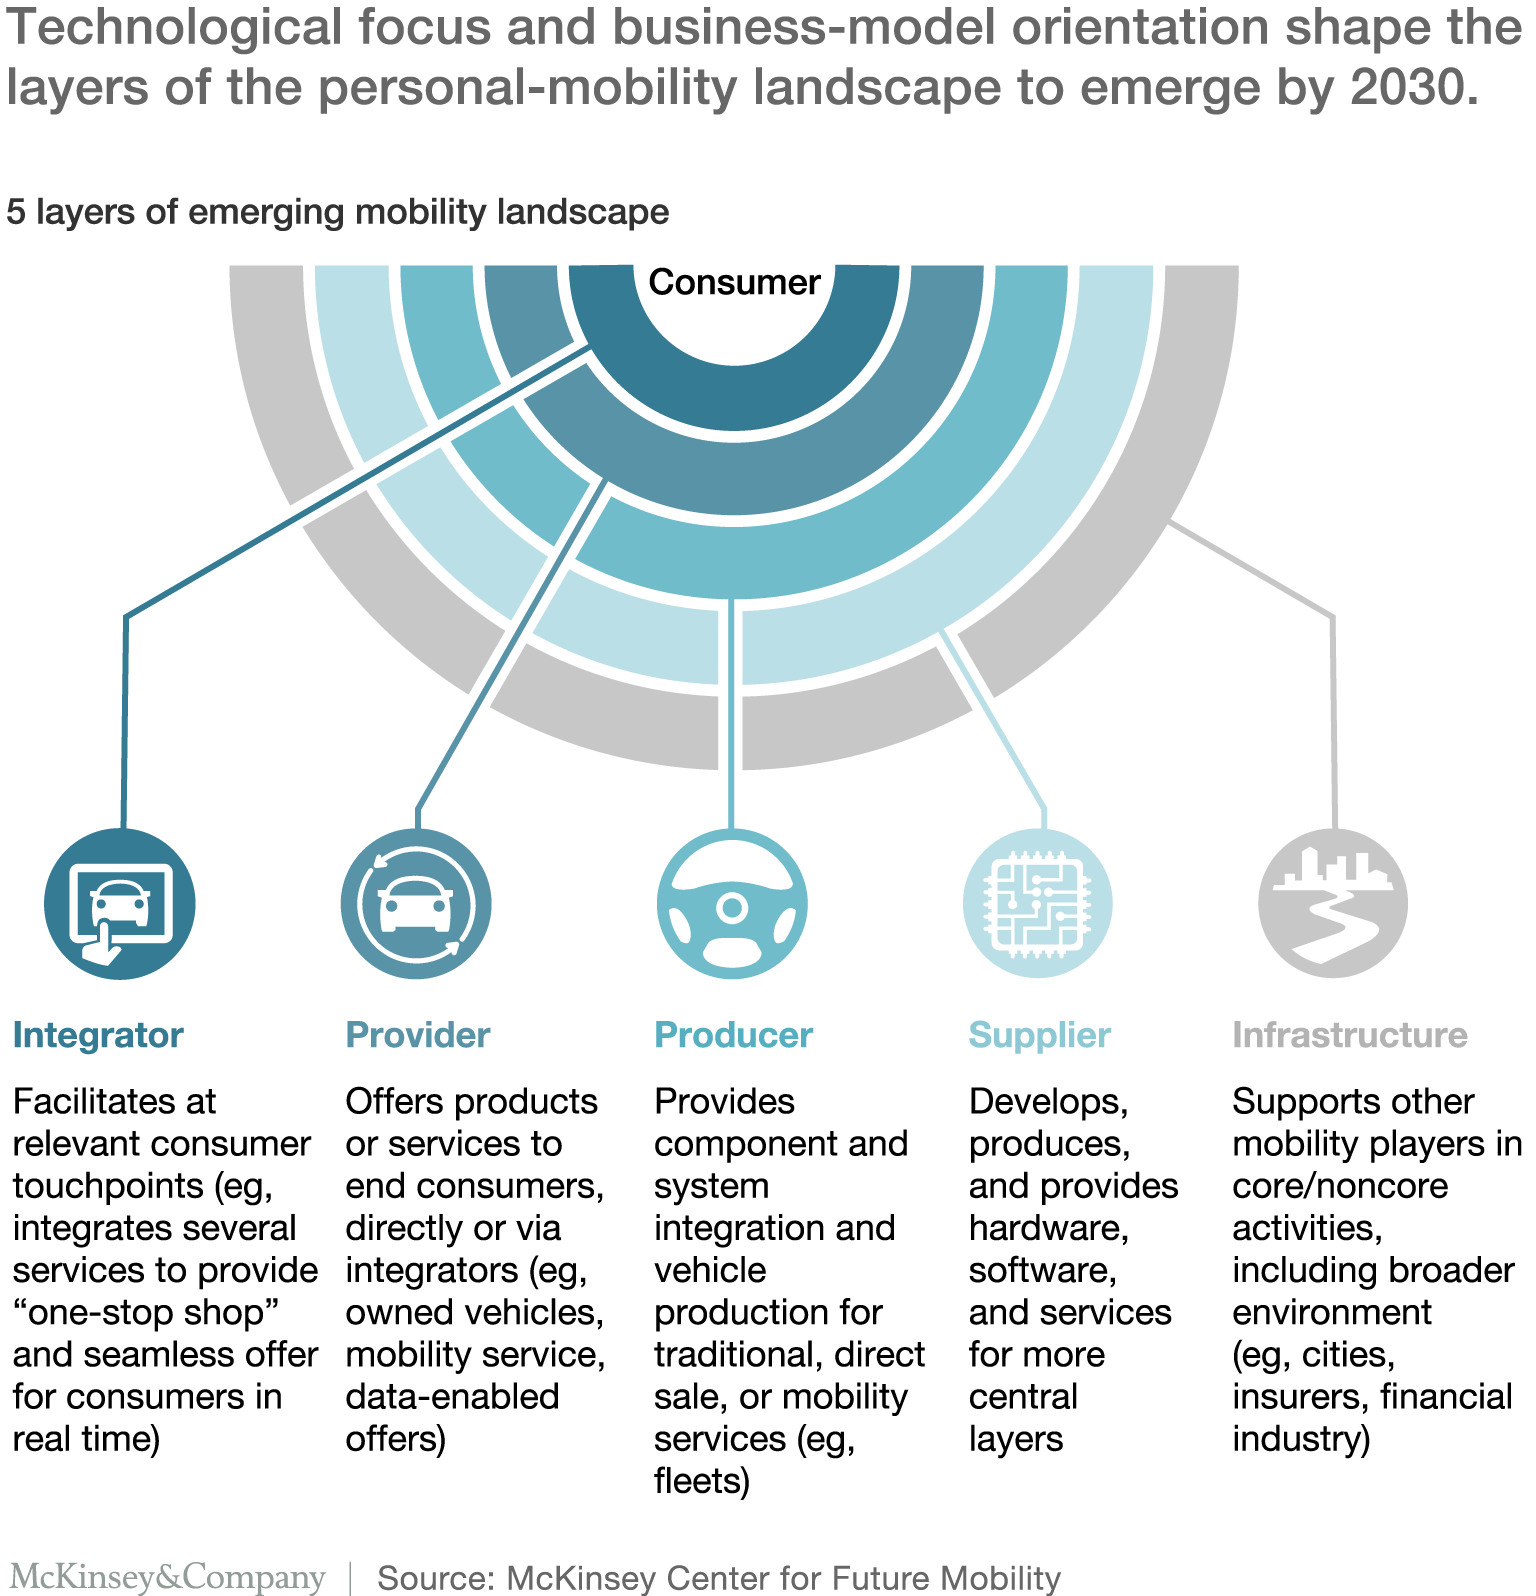 5 layers of emerging mobility landscape, based on technology focus and business model orientation